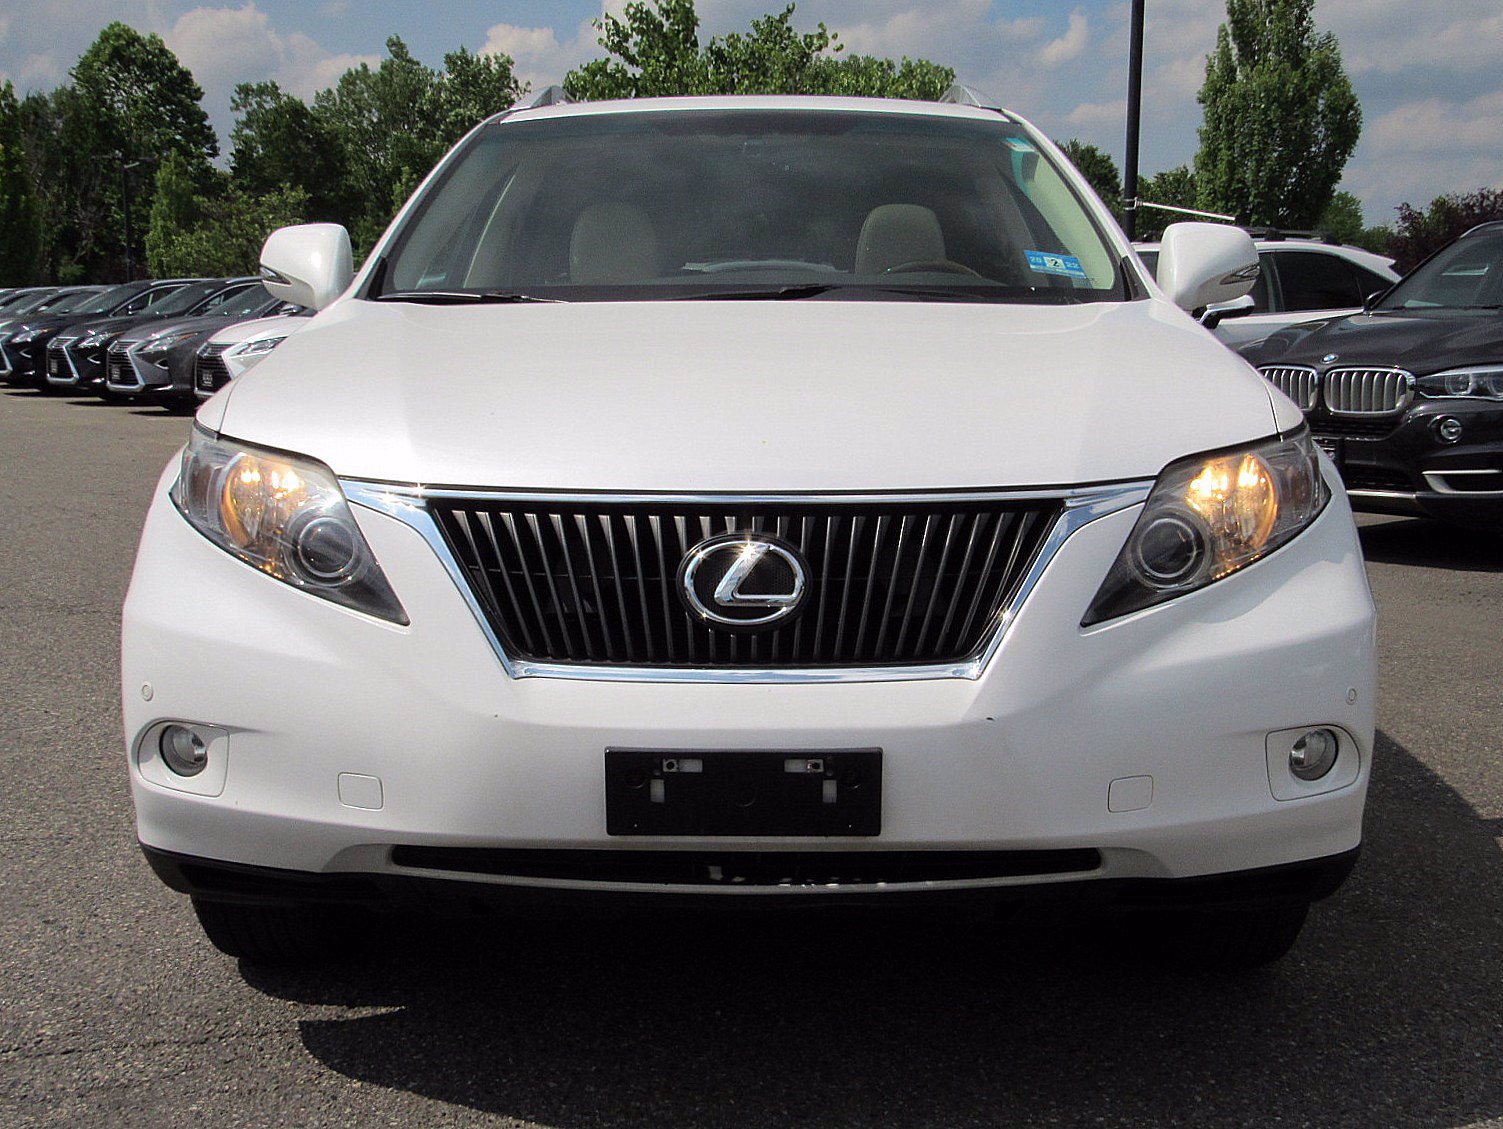 PreOwned 2012 Lexus RX 350 350 Sport Utility in Whippany